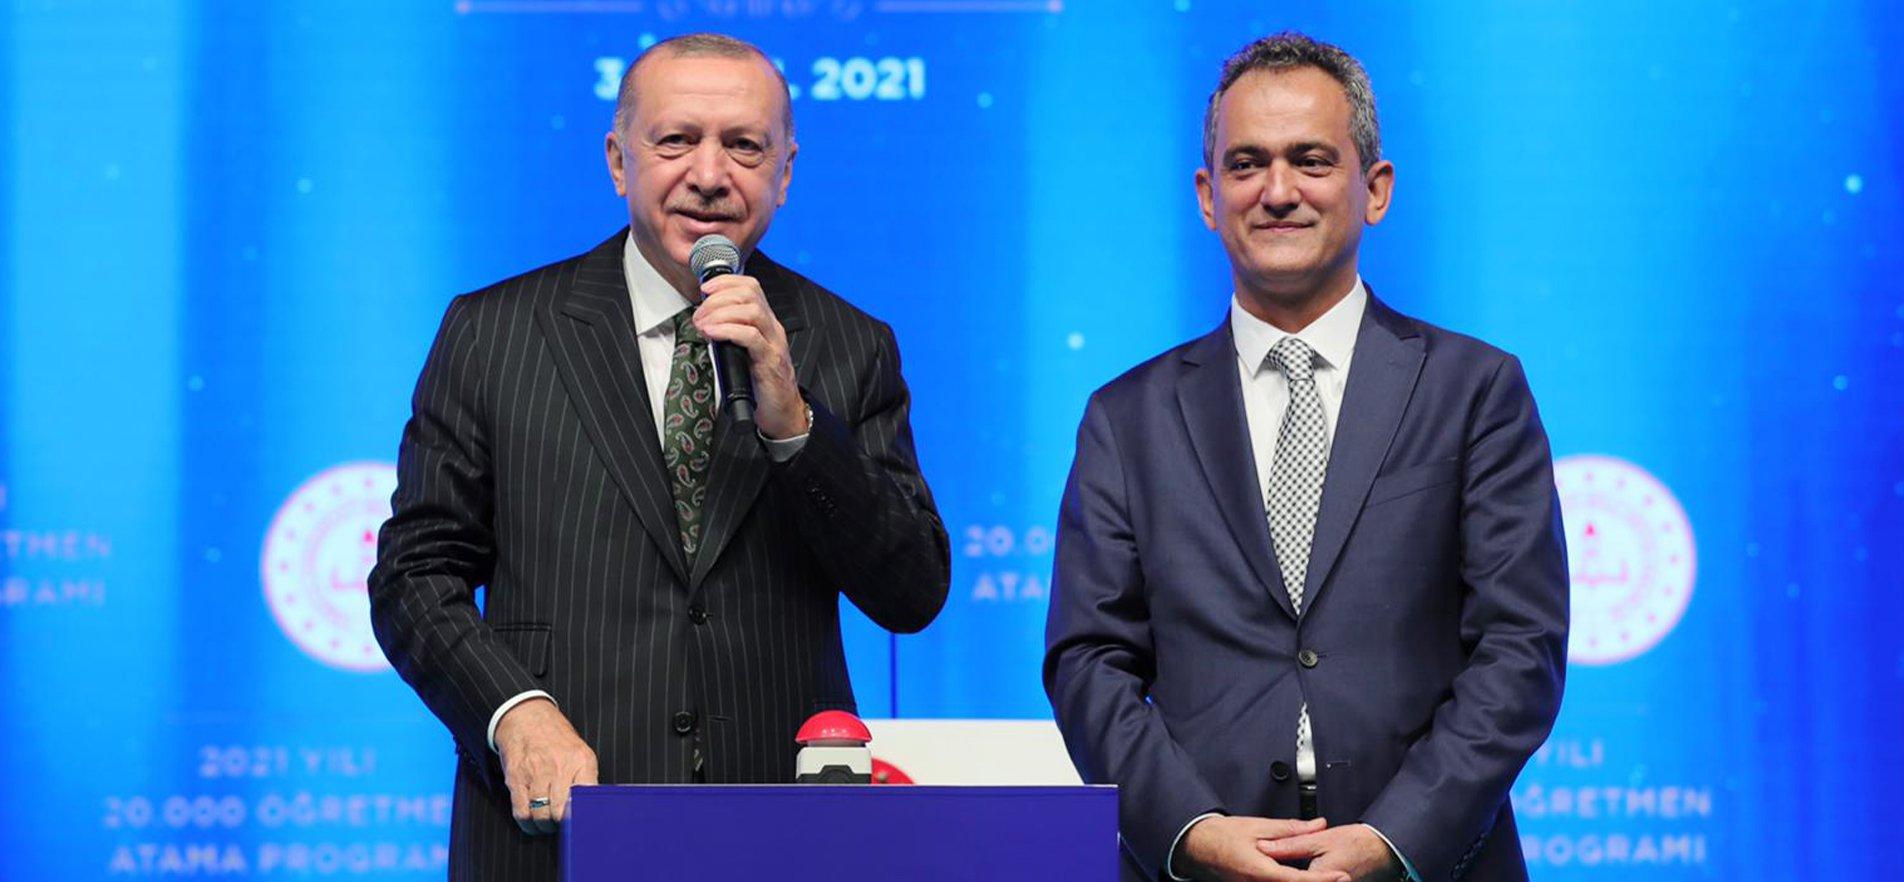 20 THOUSAND TEACHERS APPOINTED IN A CEREMONY PARTICIPATED BY PRESIDENT ERDOĞAN